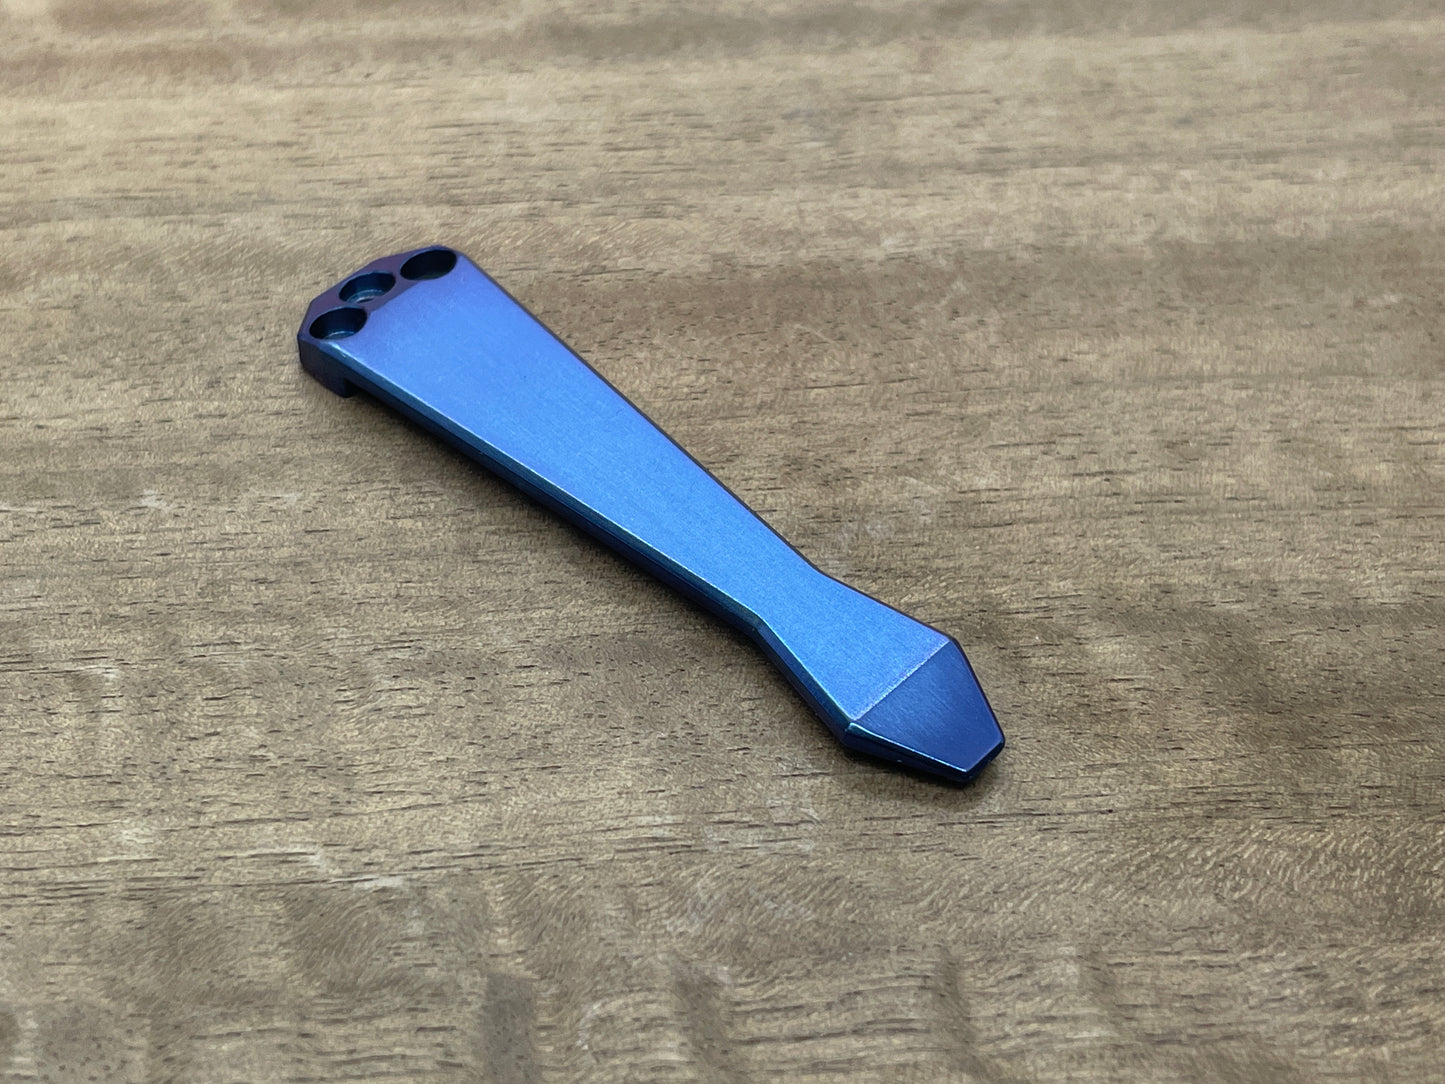 Polished Blue Ano Dmd Titanium CLIP for most Benchmade models